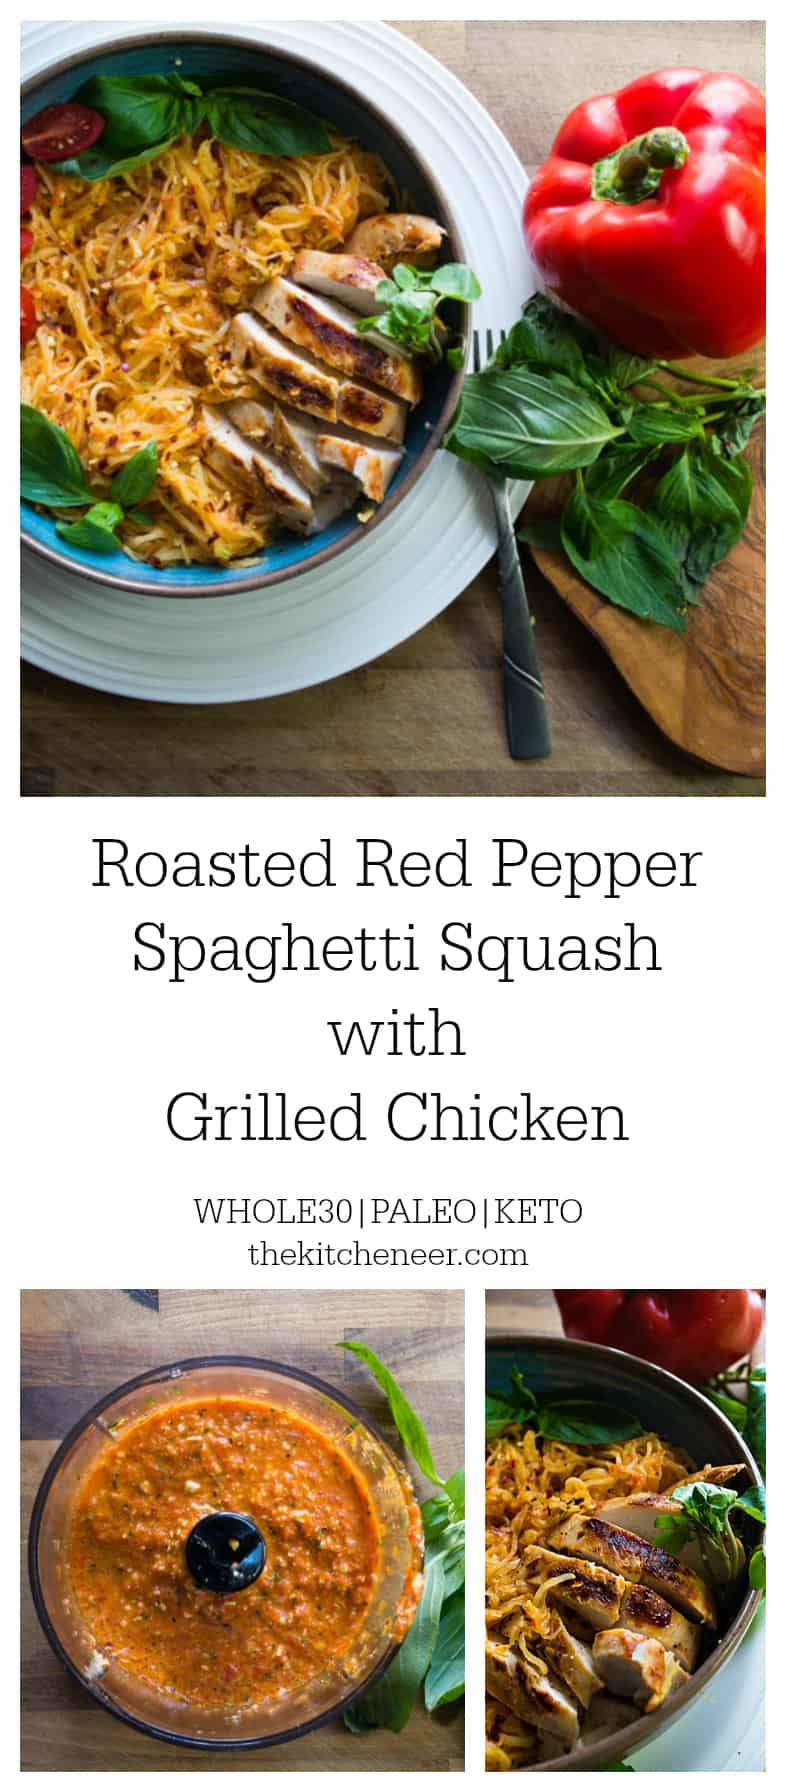 Roasted Red Pepper Spaghetti Squash with Grilled Chicken- a Whole30 pasta dinner recipe that will sure to be a crowd pleaser!|thekitcheneer.com